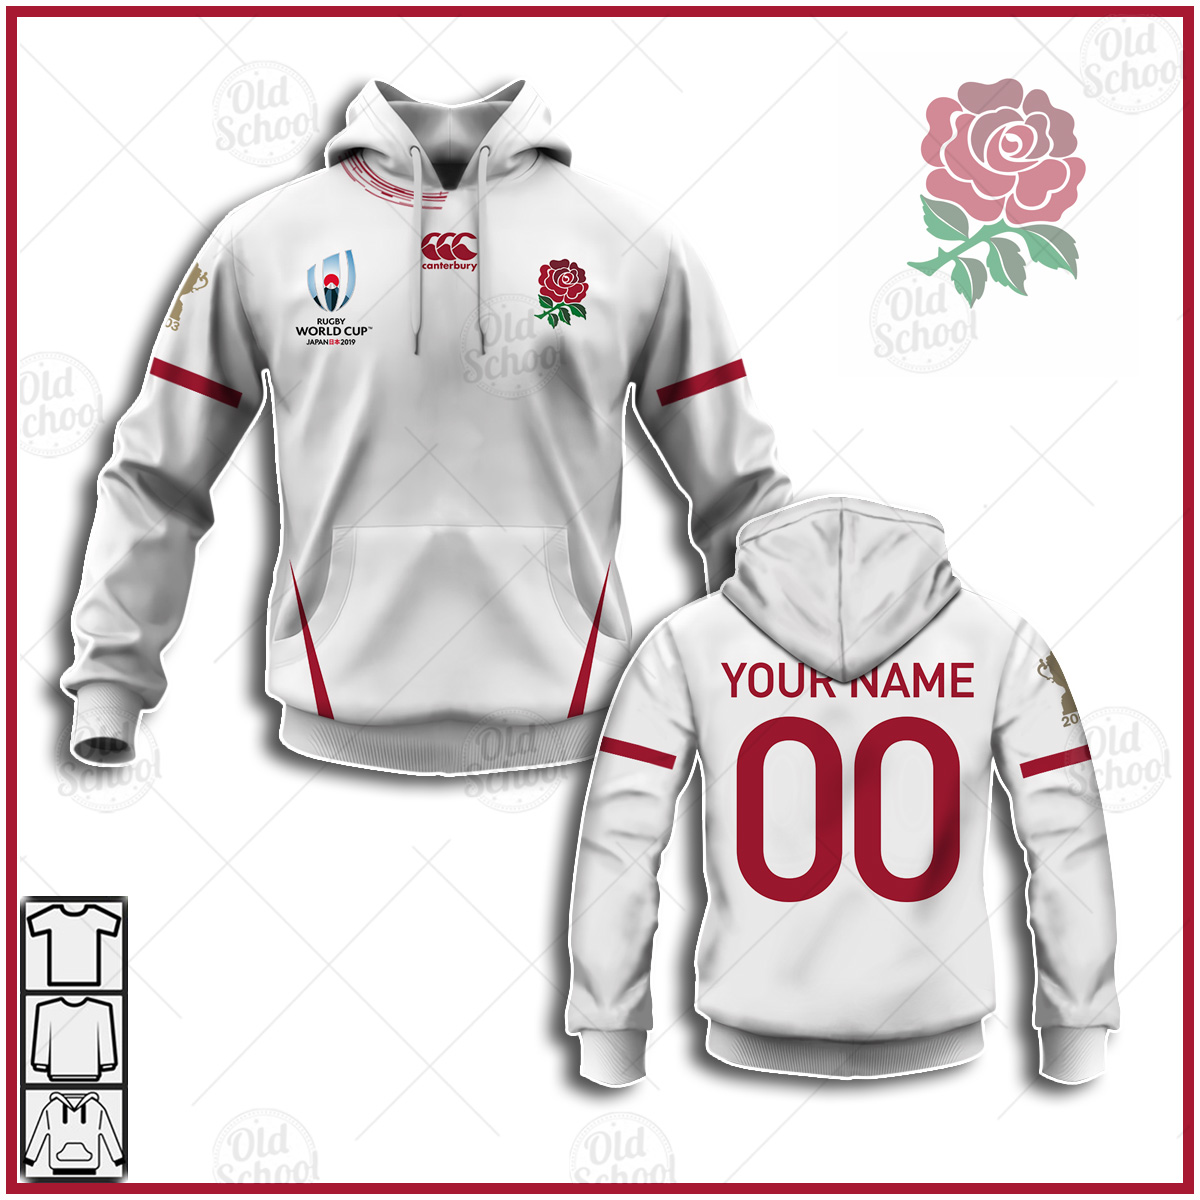 Personalise England national rugby union team World Cup Rugby Home Jersey